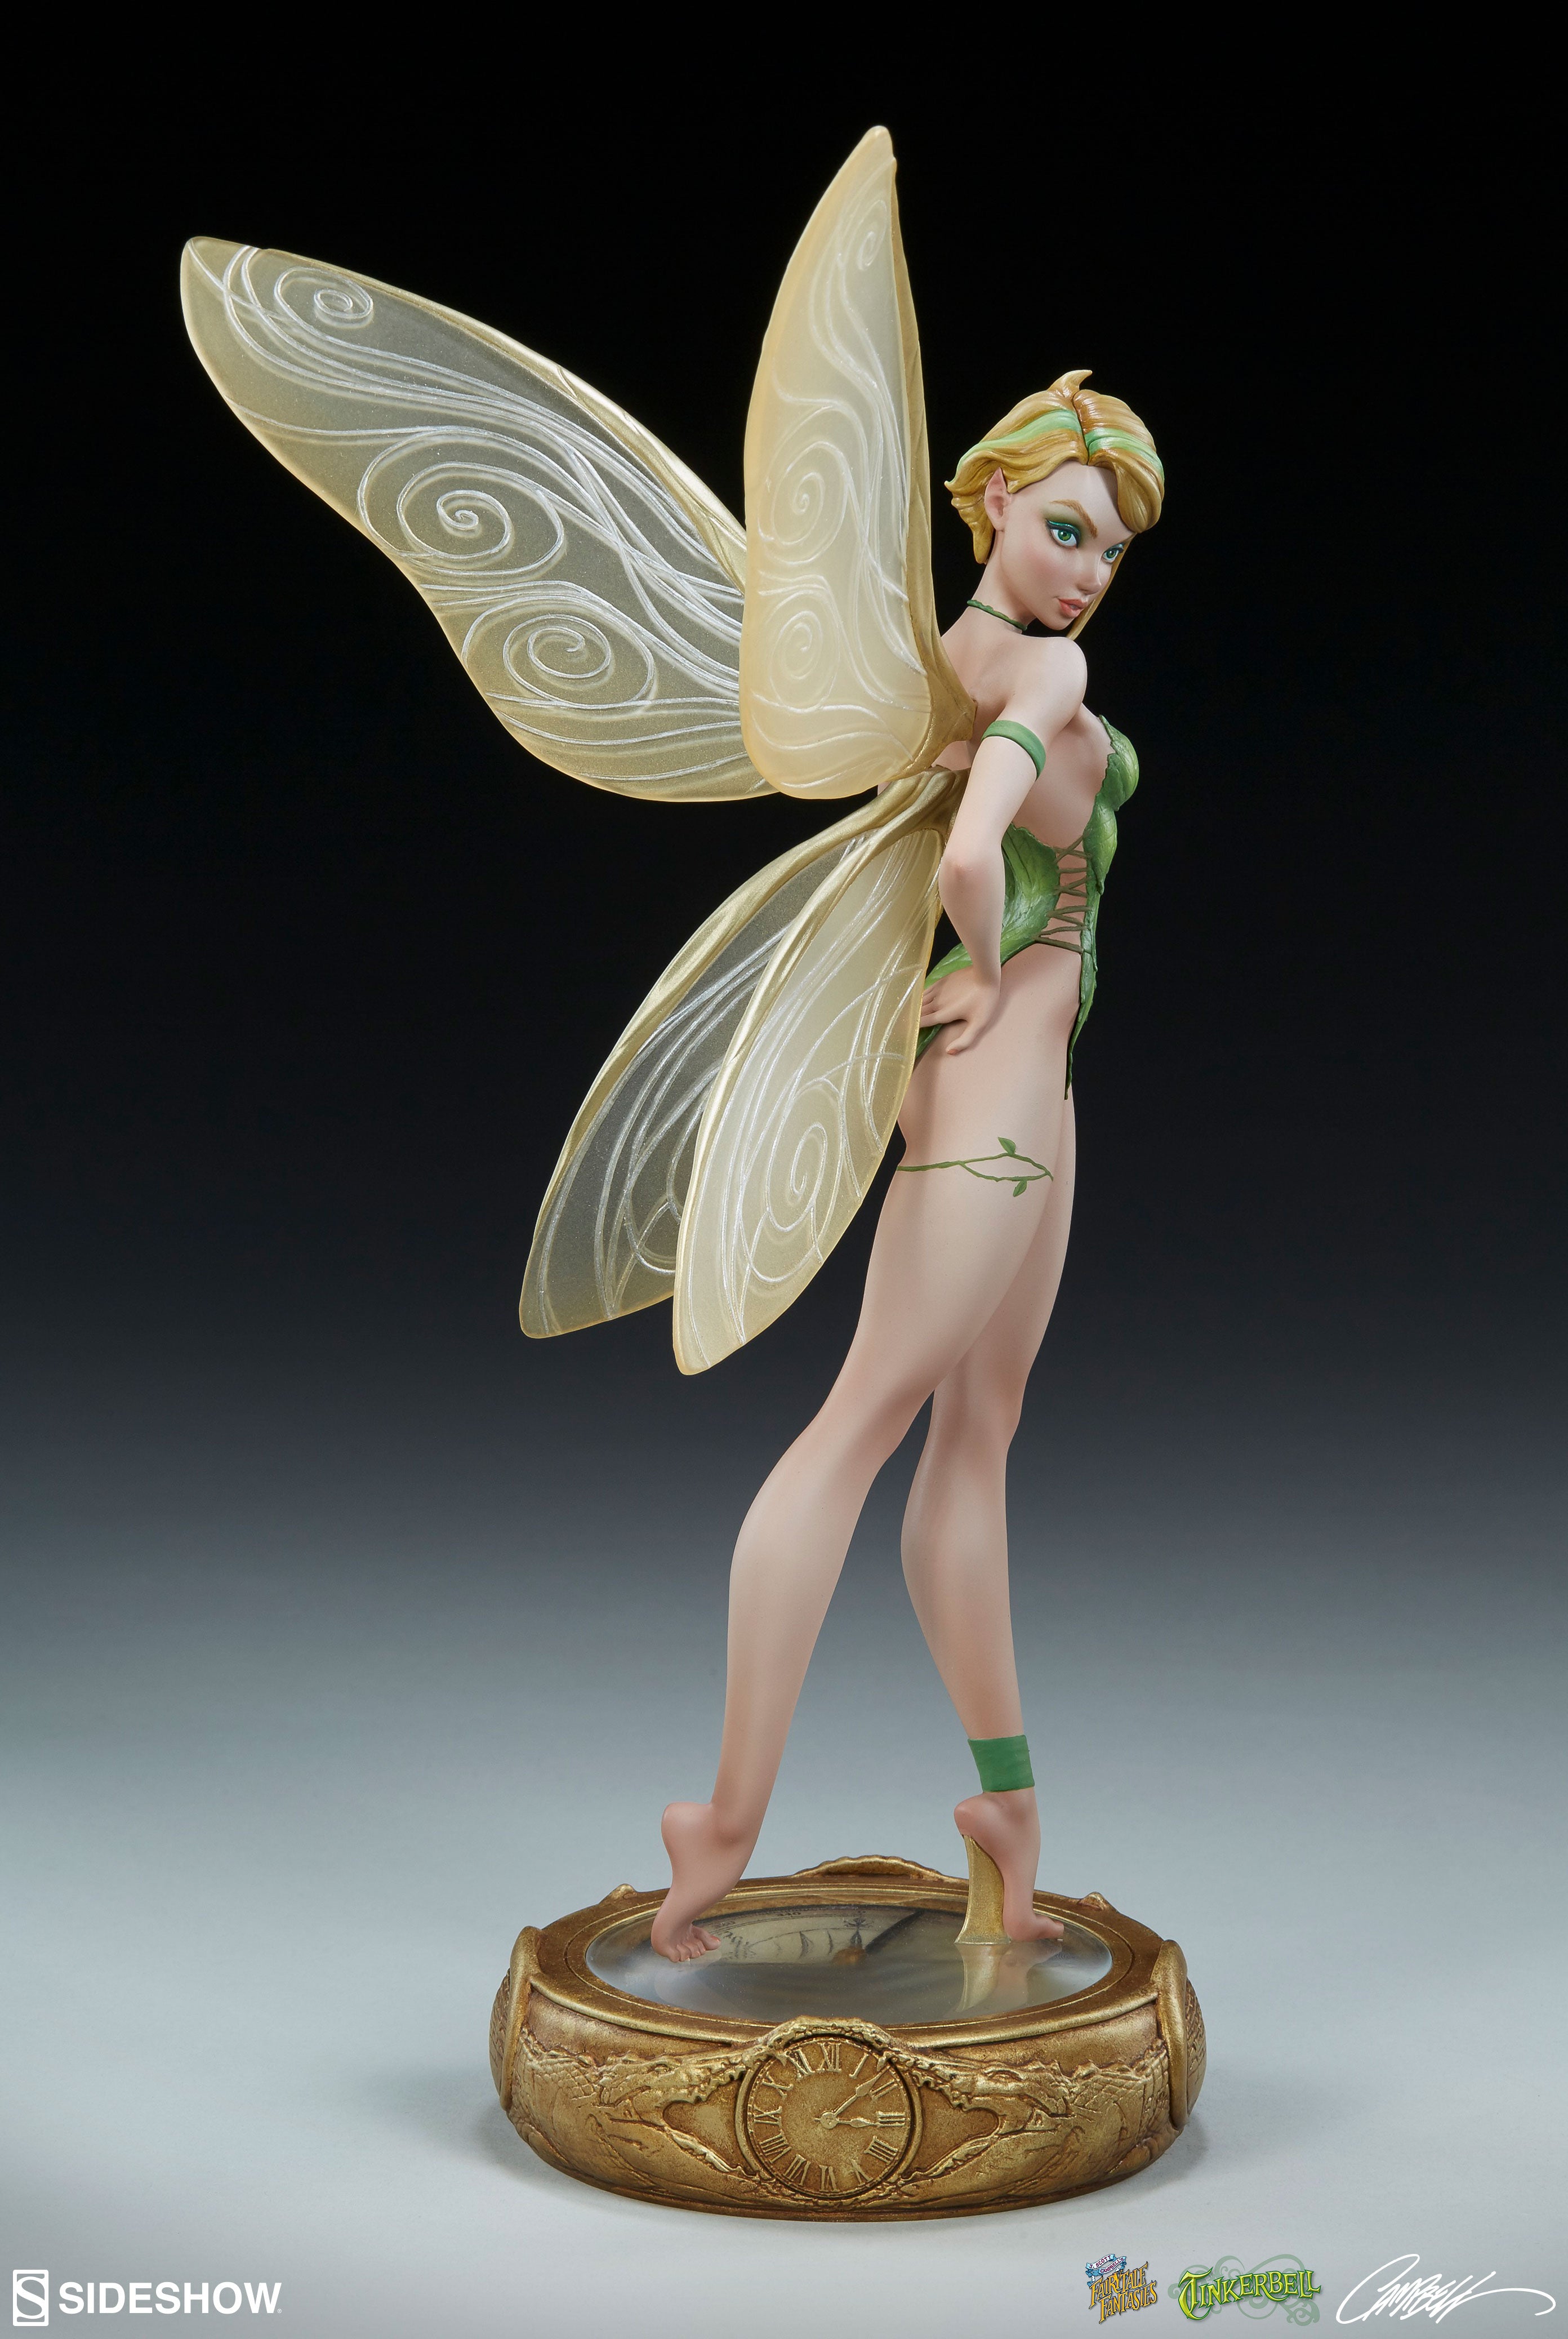 Sideshow Collectibles - J. Scott Campbell's Fairytale Fantasies Collection - Tinkerbell